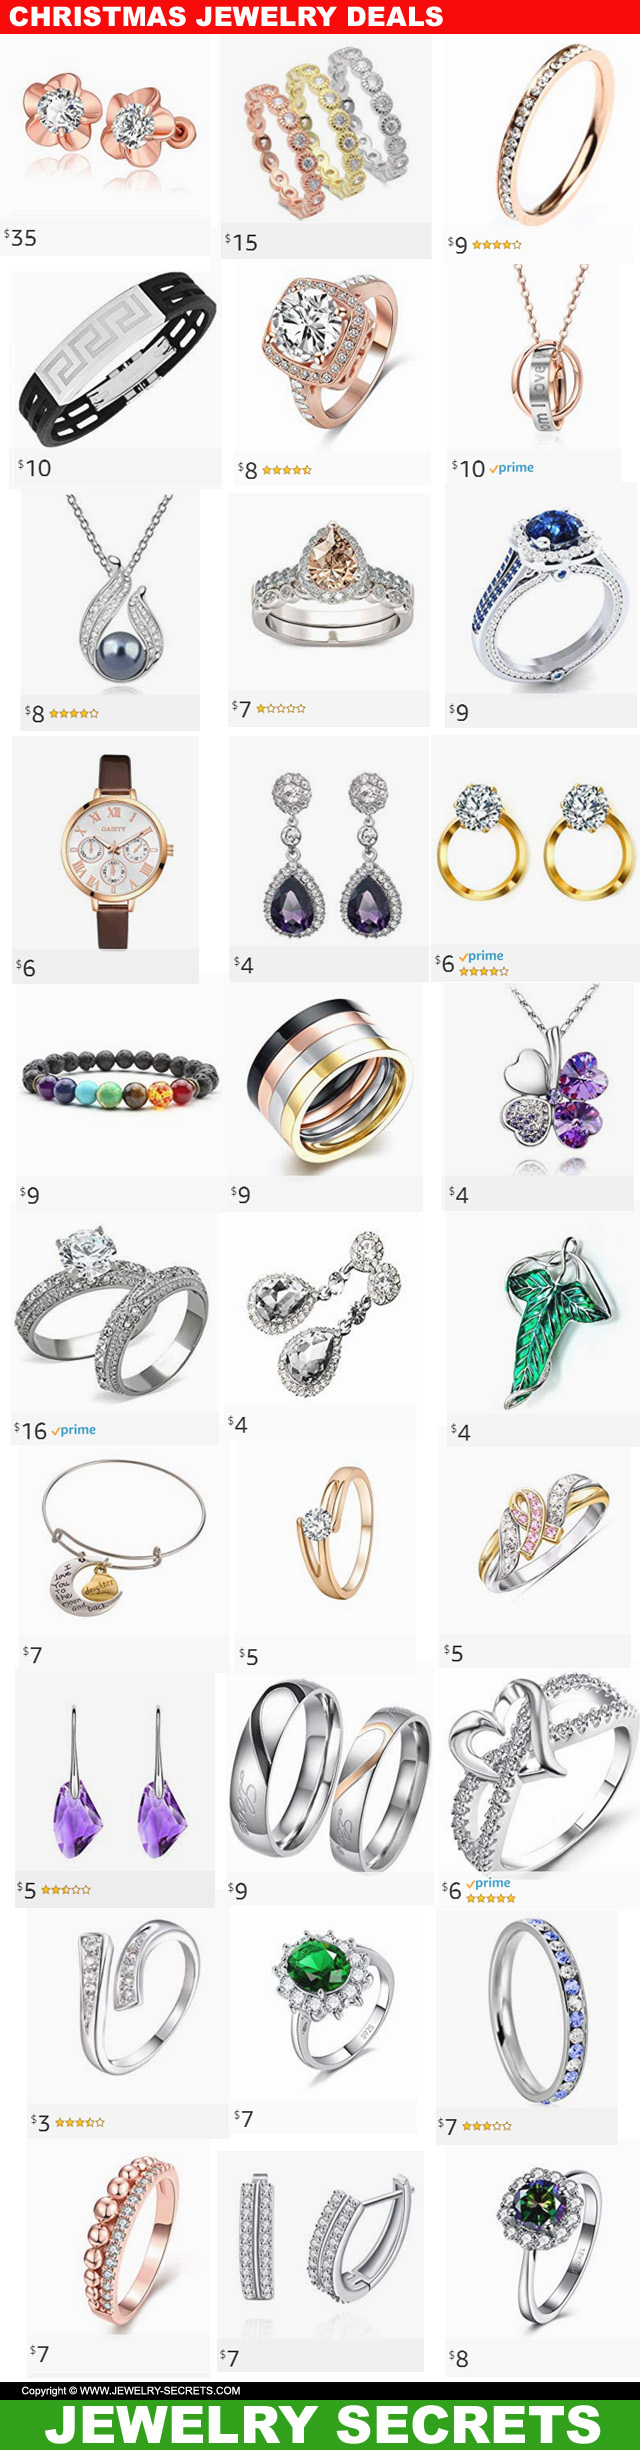 Christmas 2018 Jewelry Deals